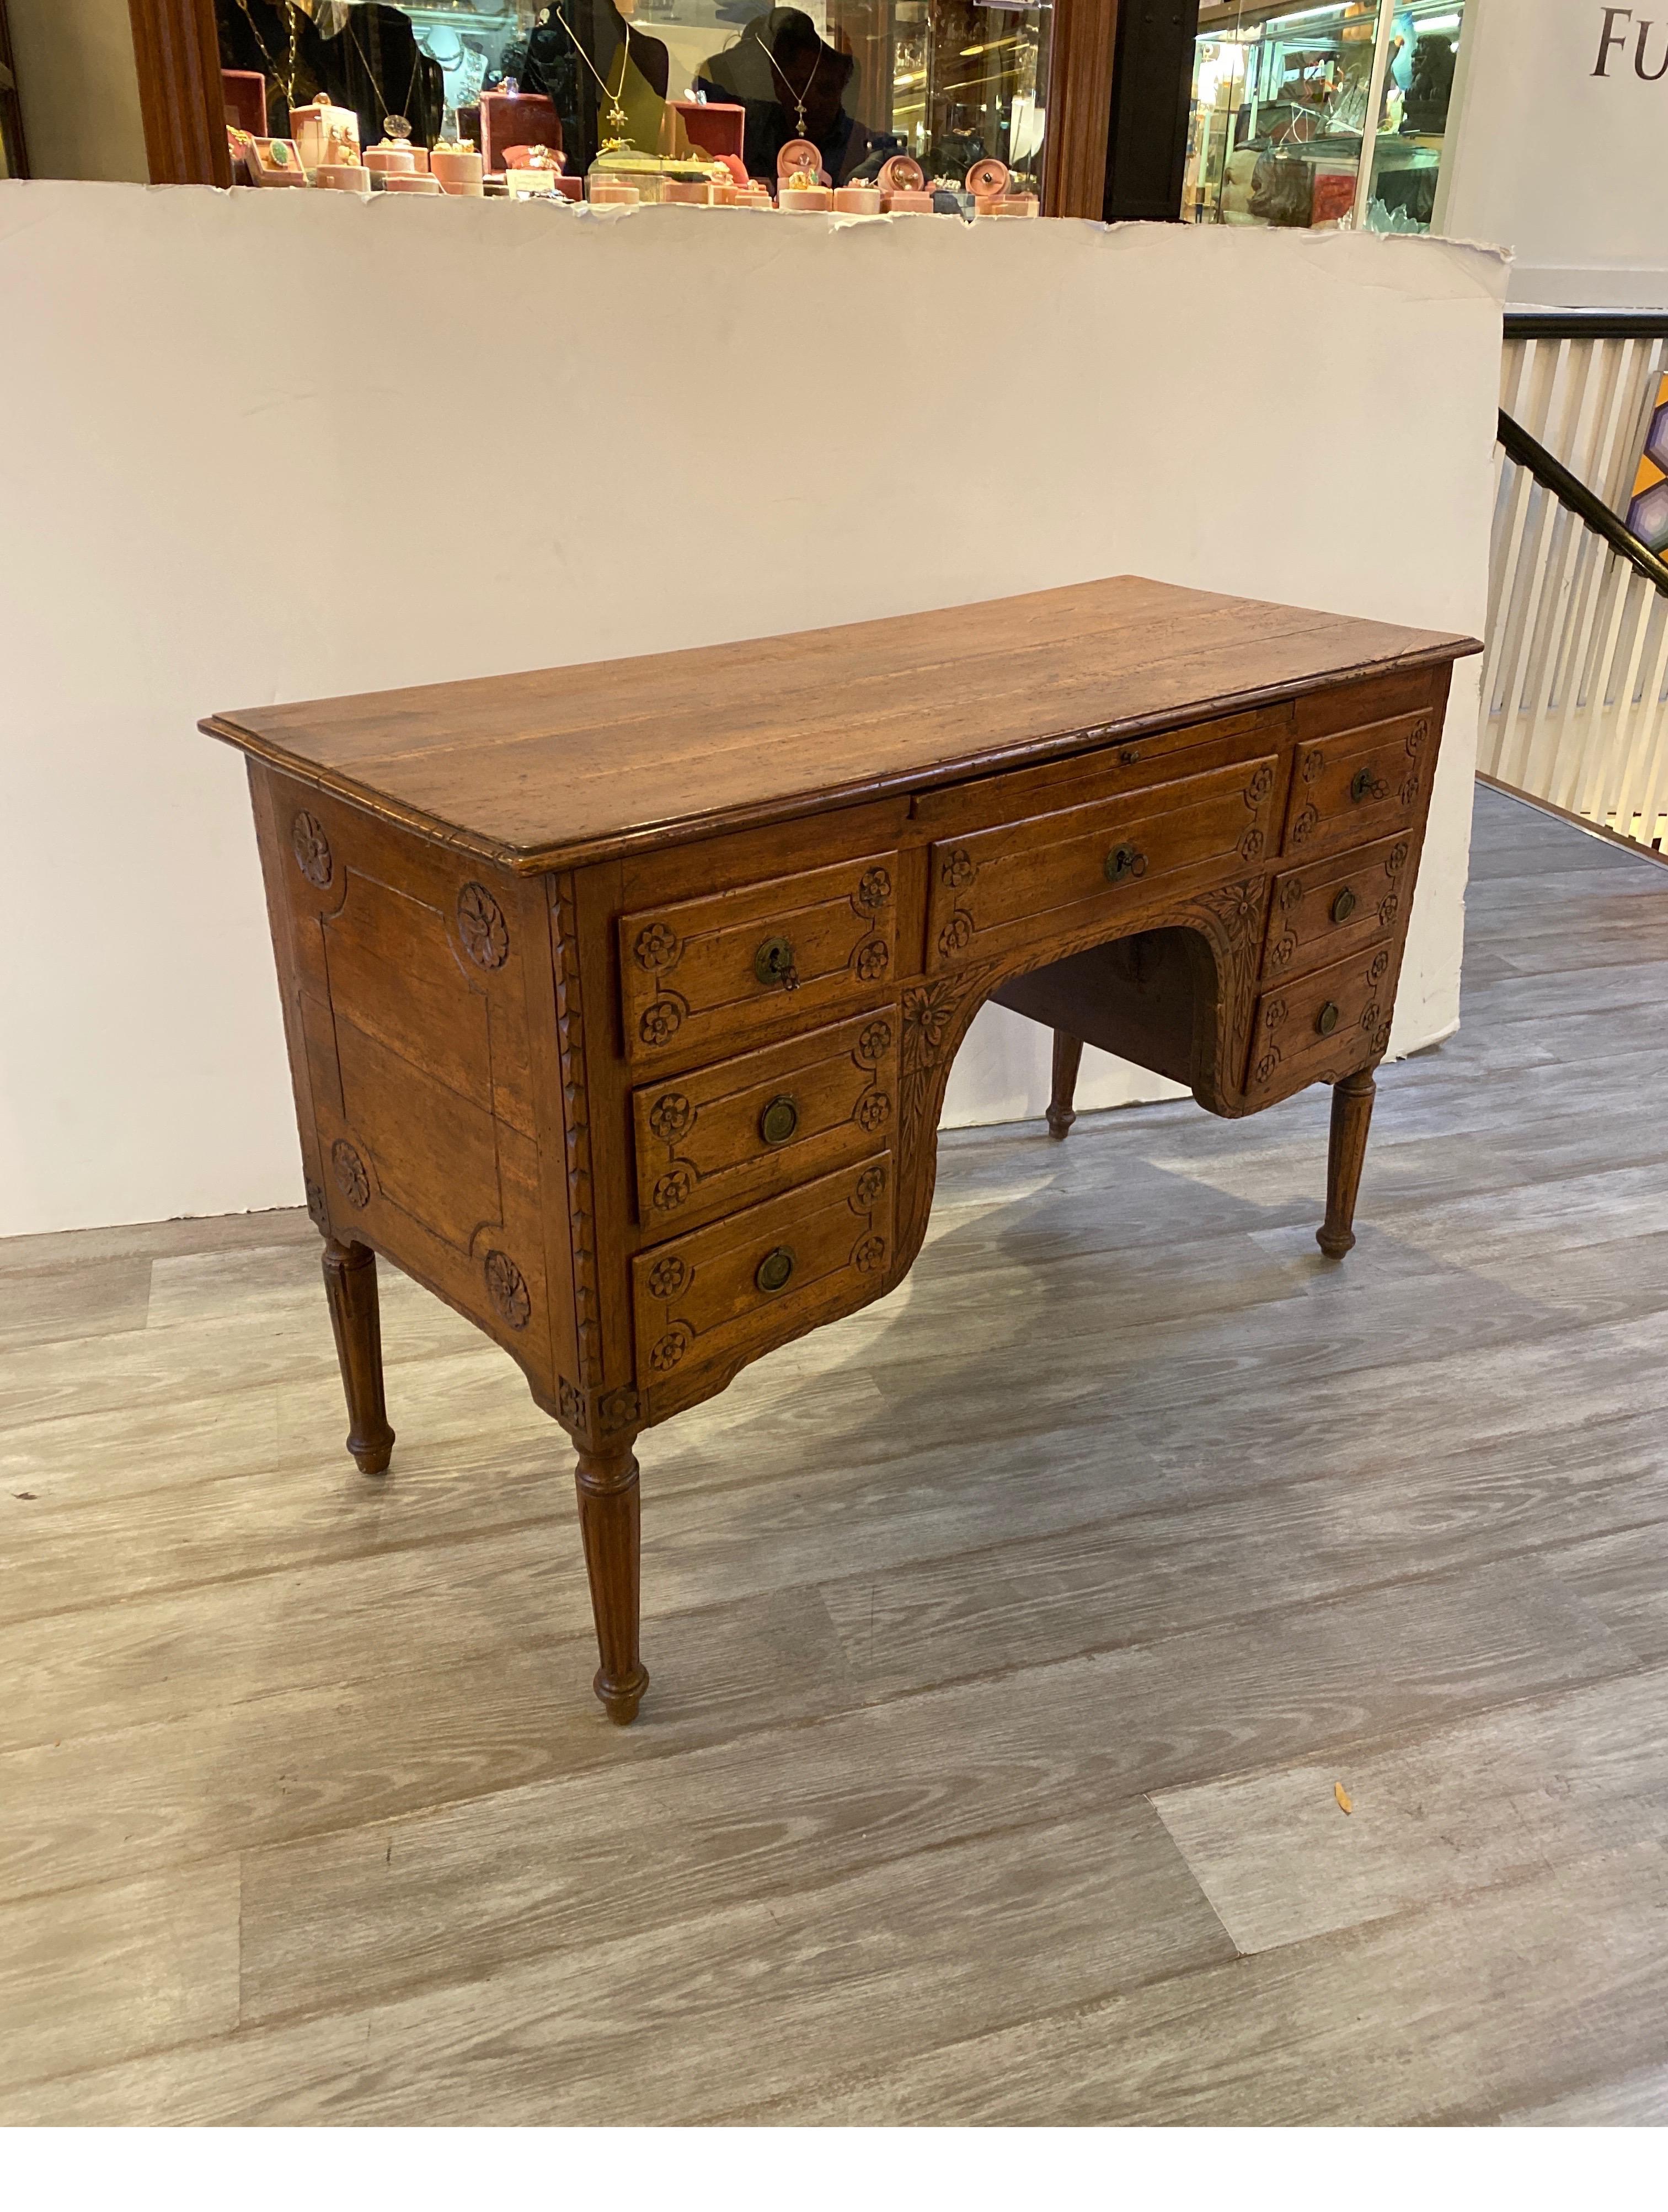 A hand carved walnut or fruitwood Italian desk. The desk with a center drawer with three side drawers on each side. Above the central drawer is a pull out tray for drafting and additional work space. The desk in in beautiful aged condition with